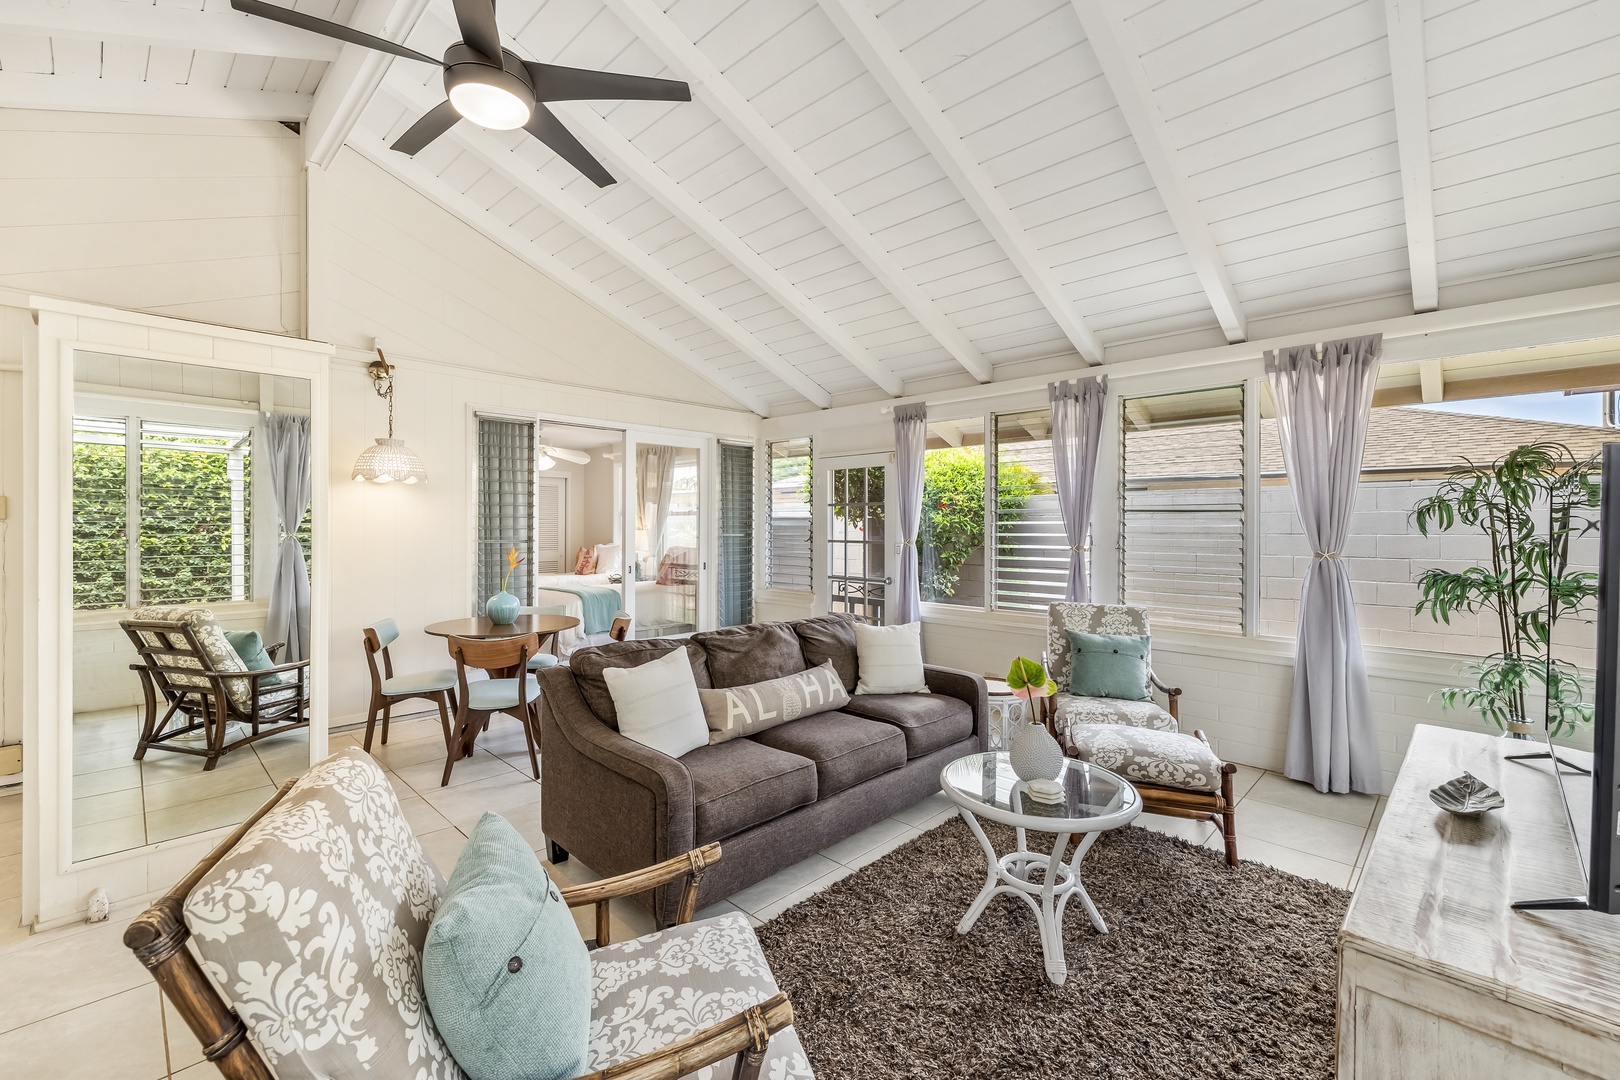 Honolulu Vacation Rentals, Kahala Cottage - Front living room with high, vaulted ceiling.